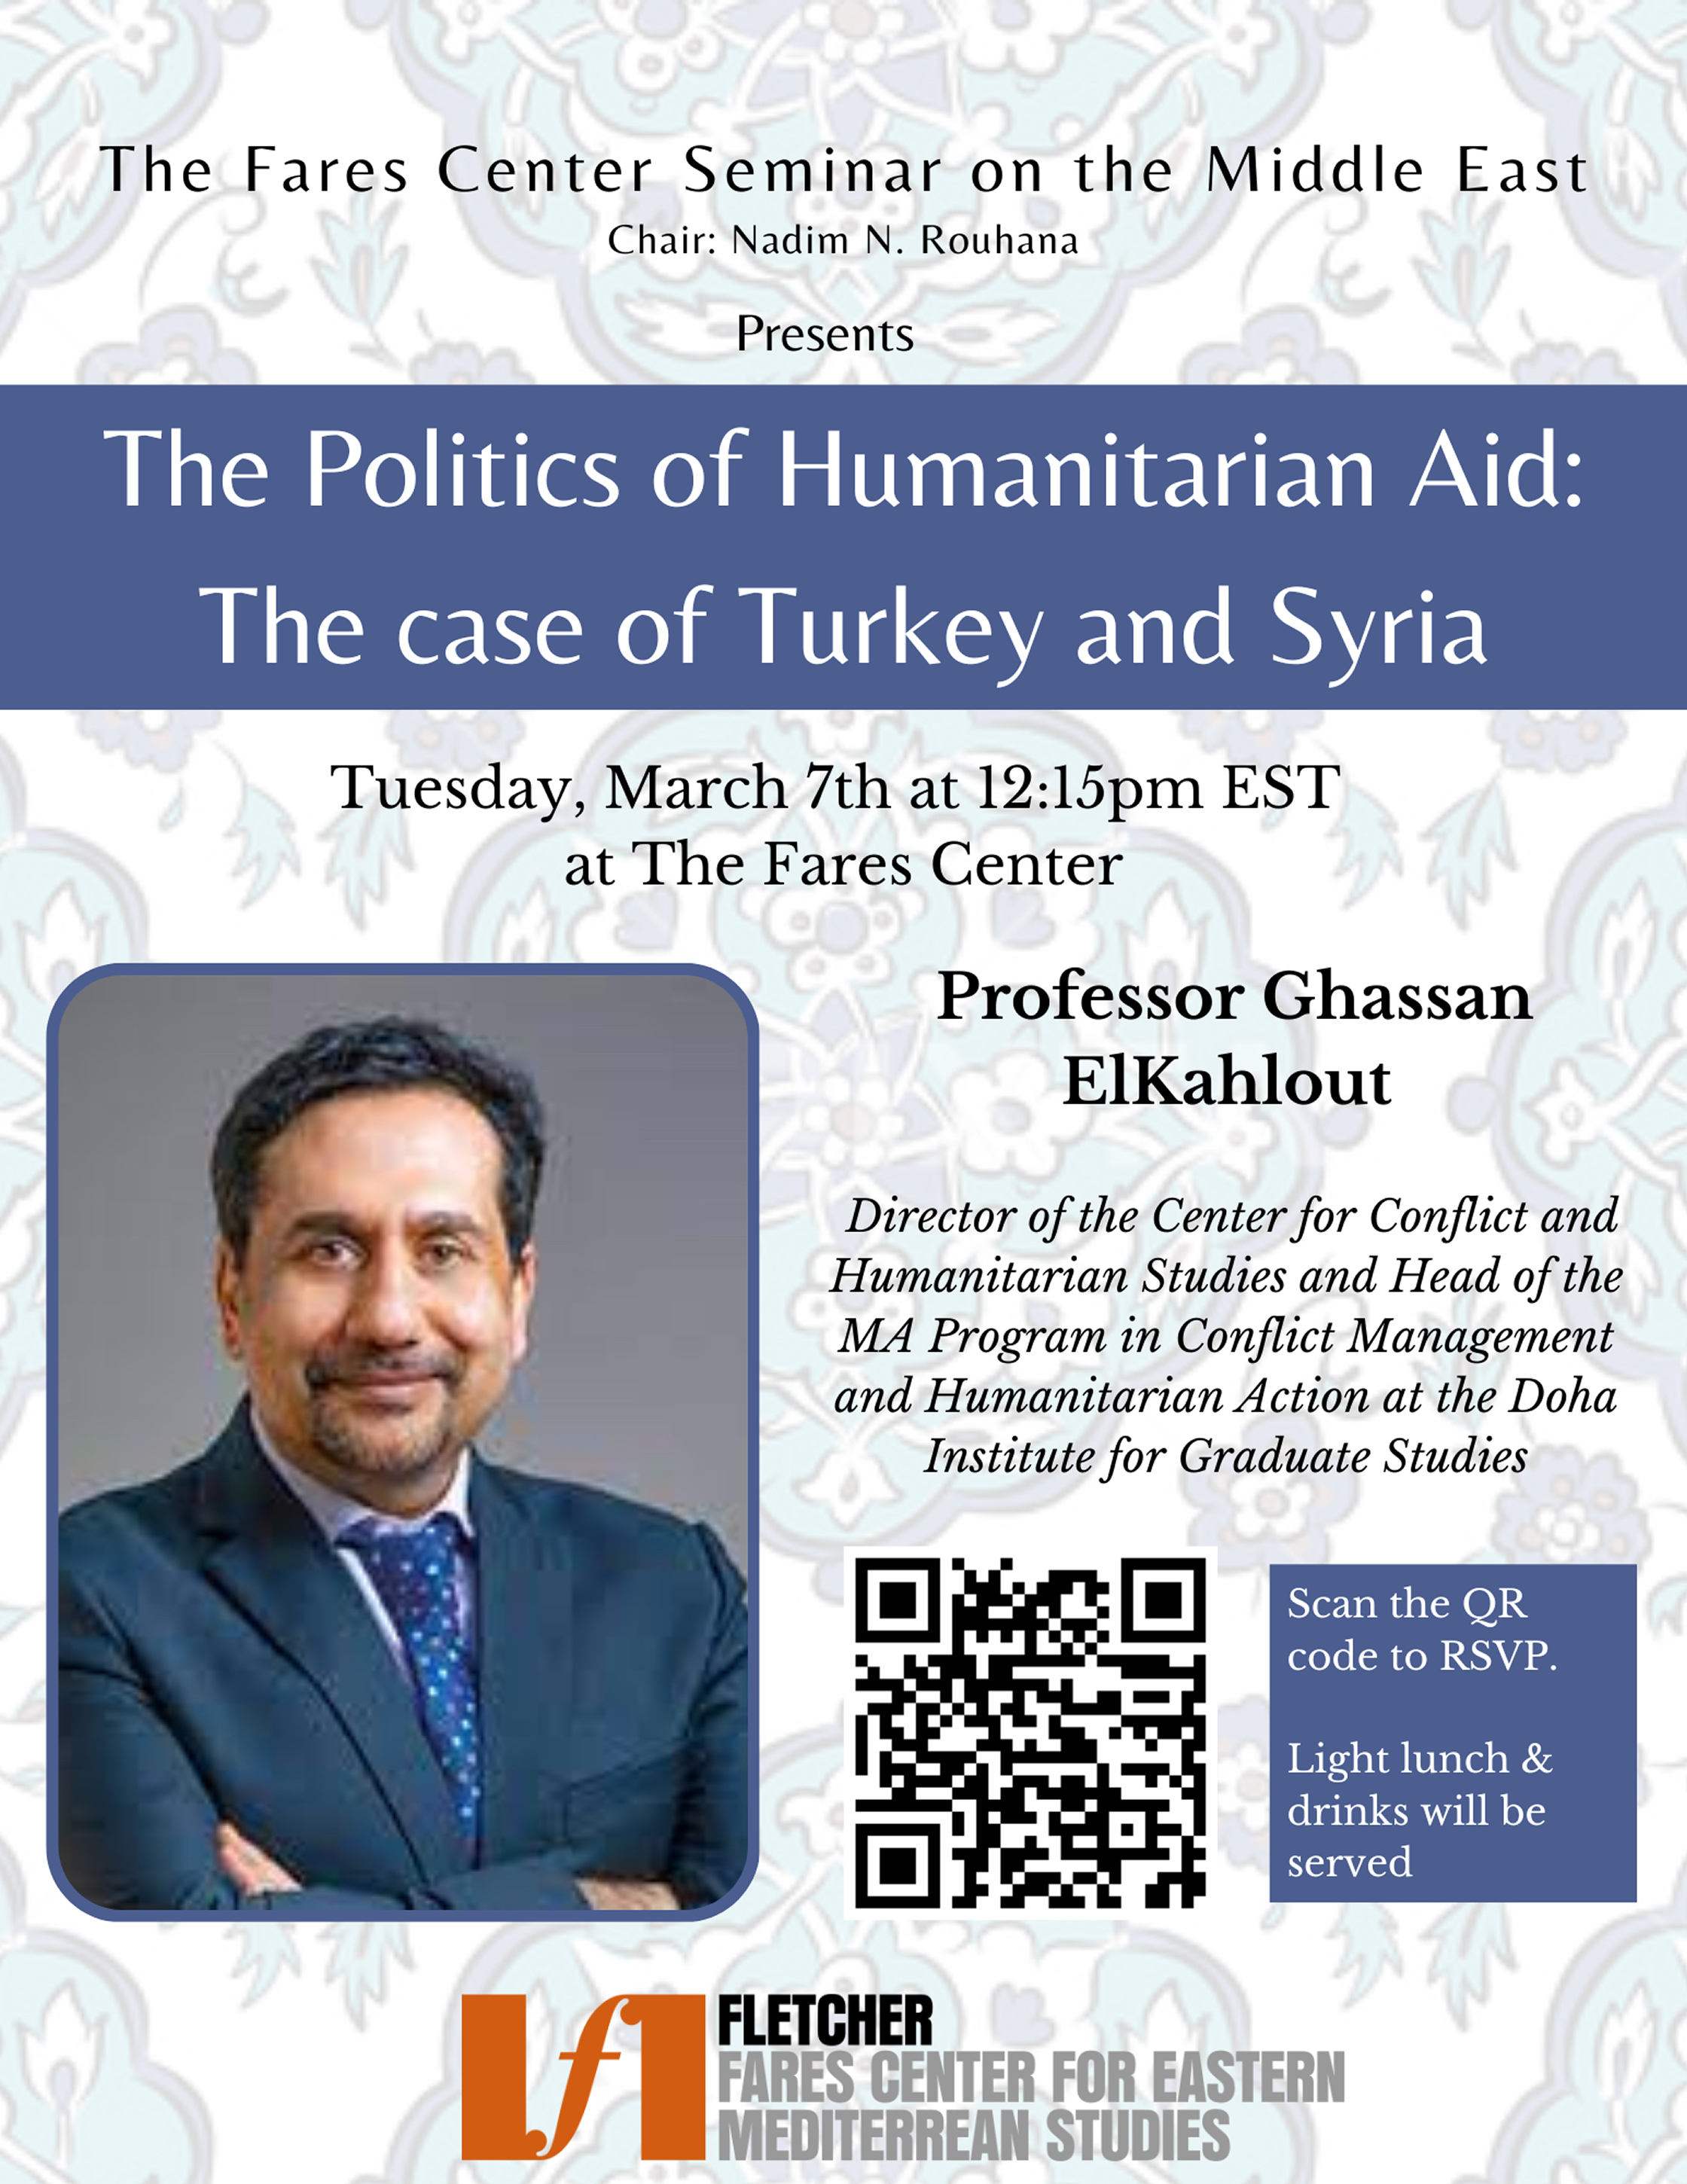 4. The Politics of Humanitarian Aid: The case of Turkey and Syria with Professor Ghassan ElKahlout